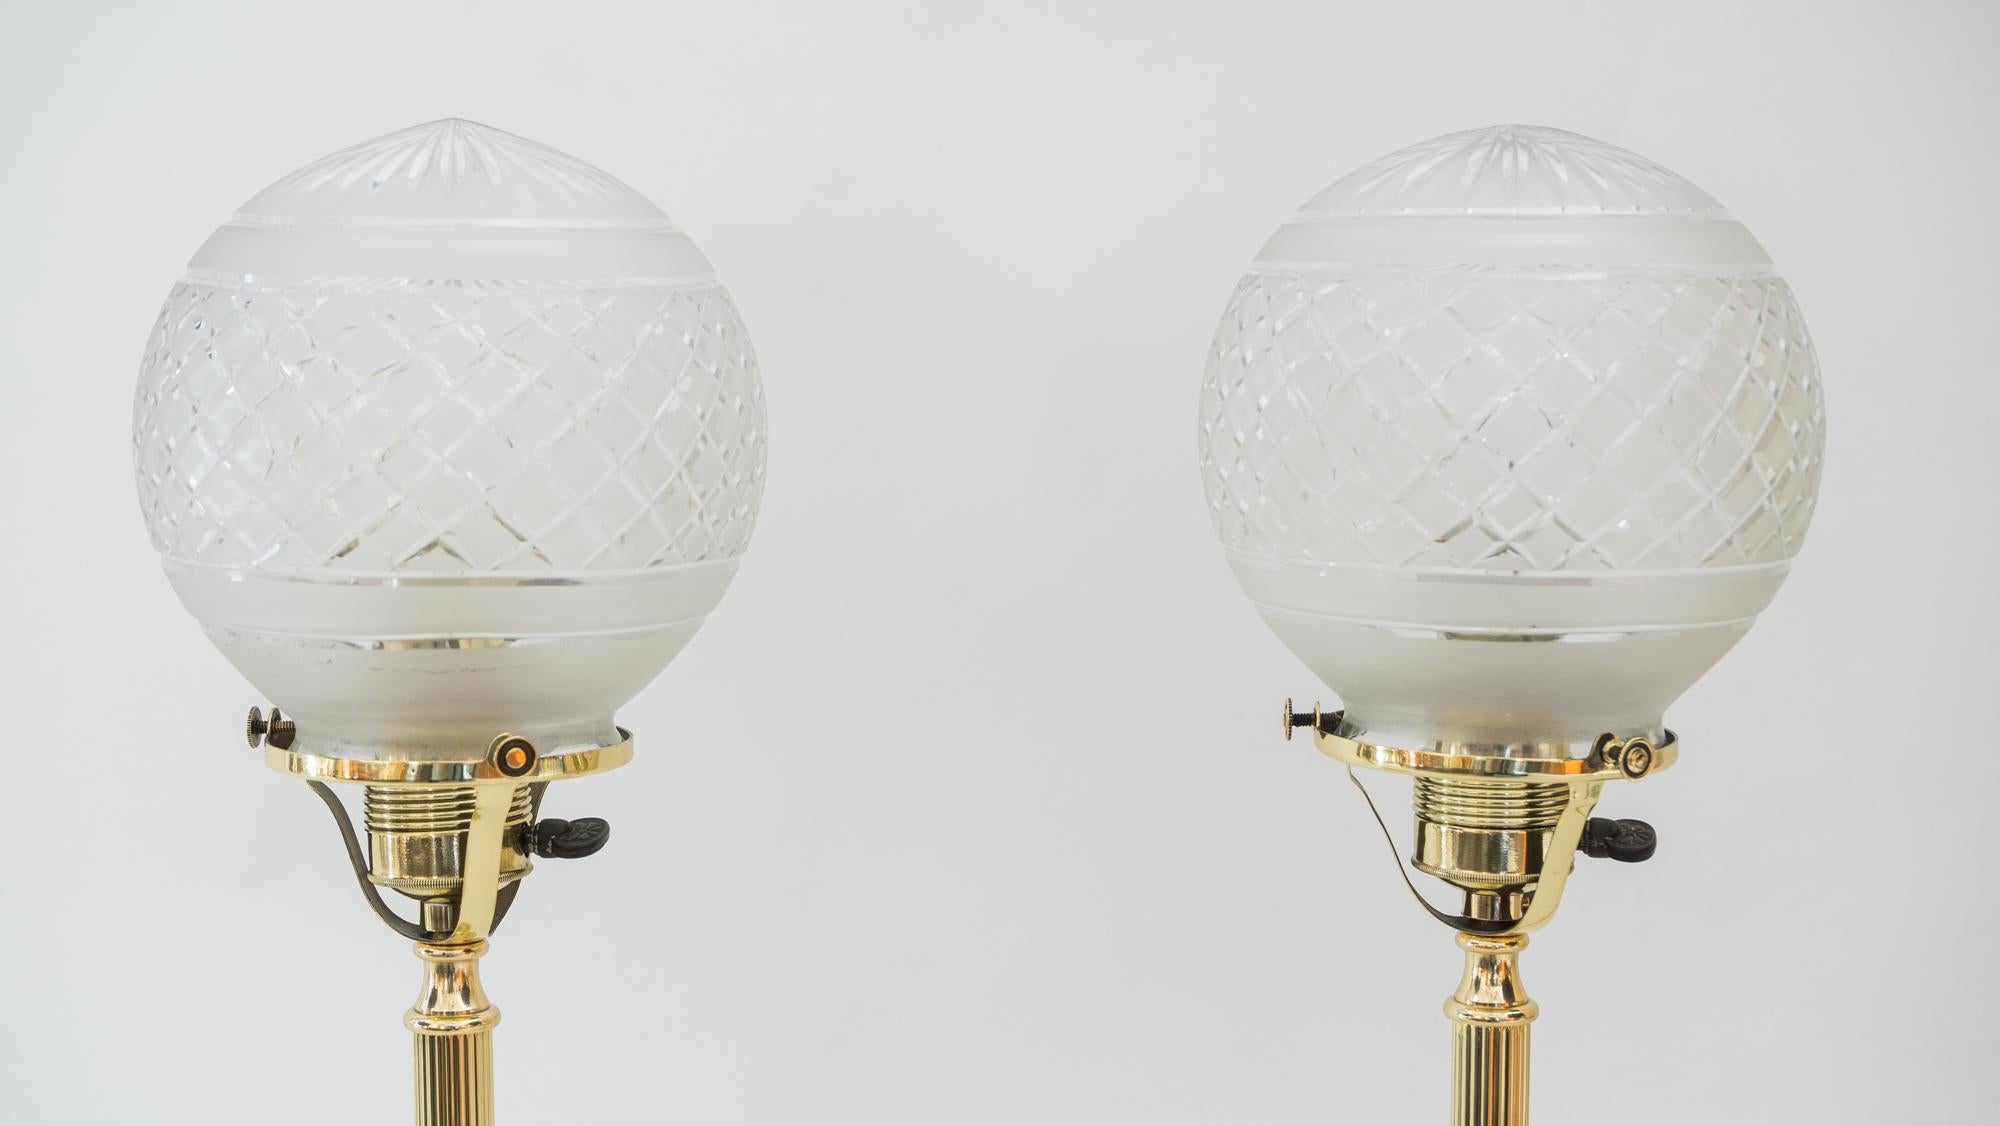 2 Jugendstil table lamps, Vienna, circa 1908s
Polished and stove enameled
Original cut glass shades.